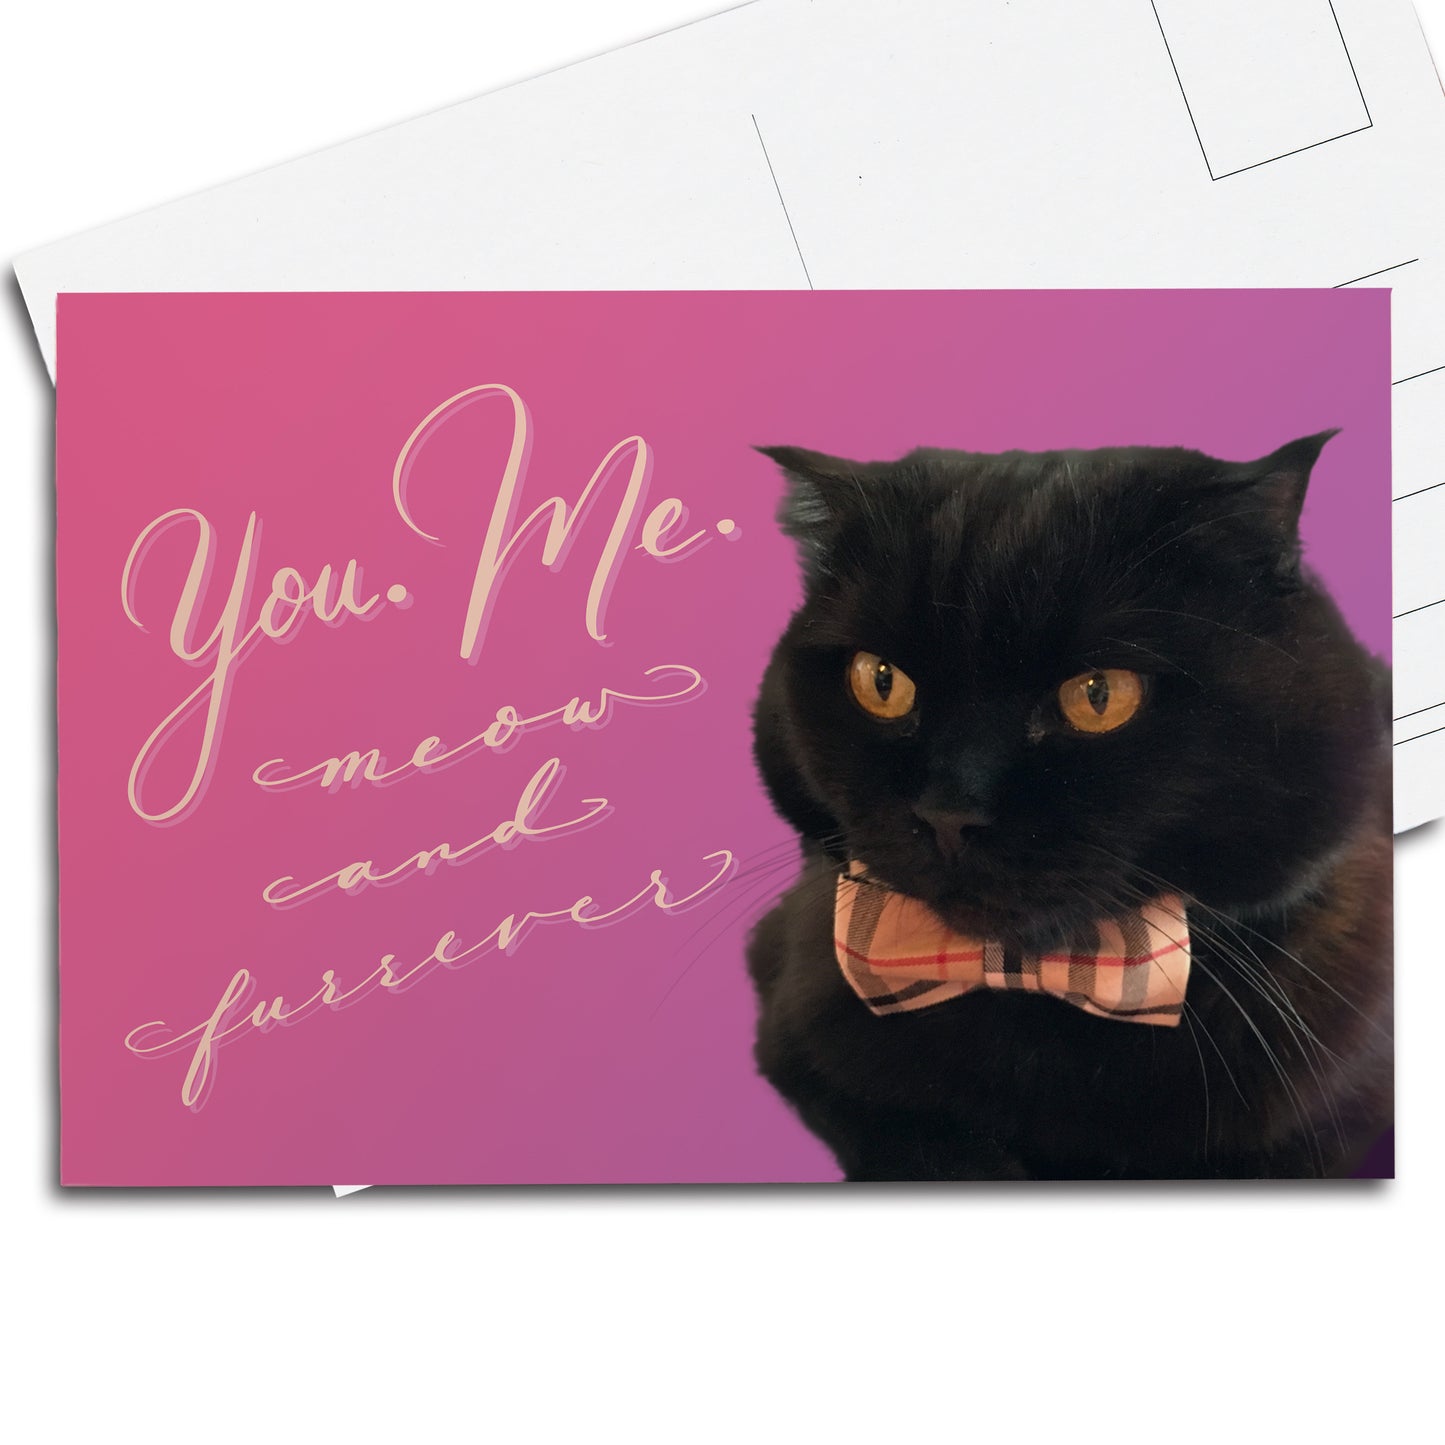 A thumbnail view of the postcard: "You. Me. Meow and Furrever"